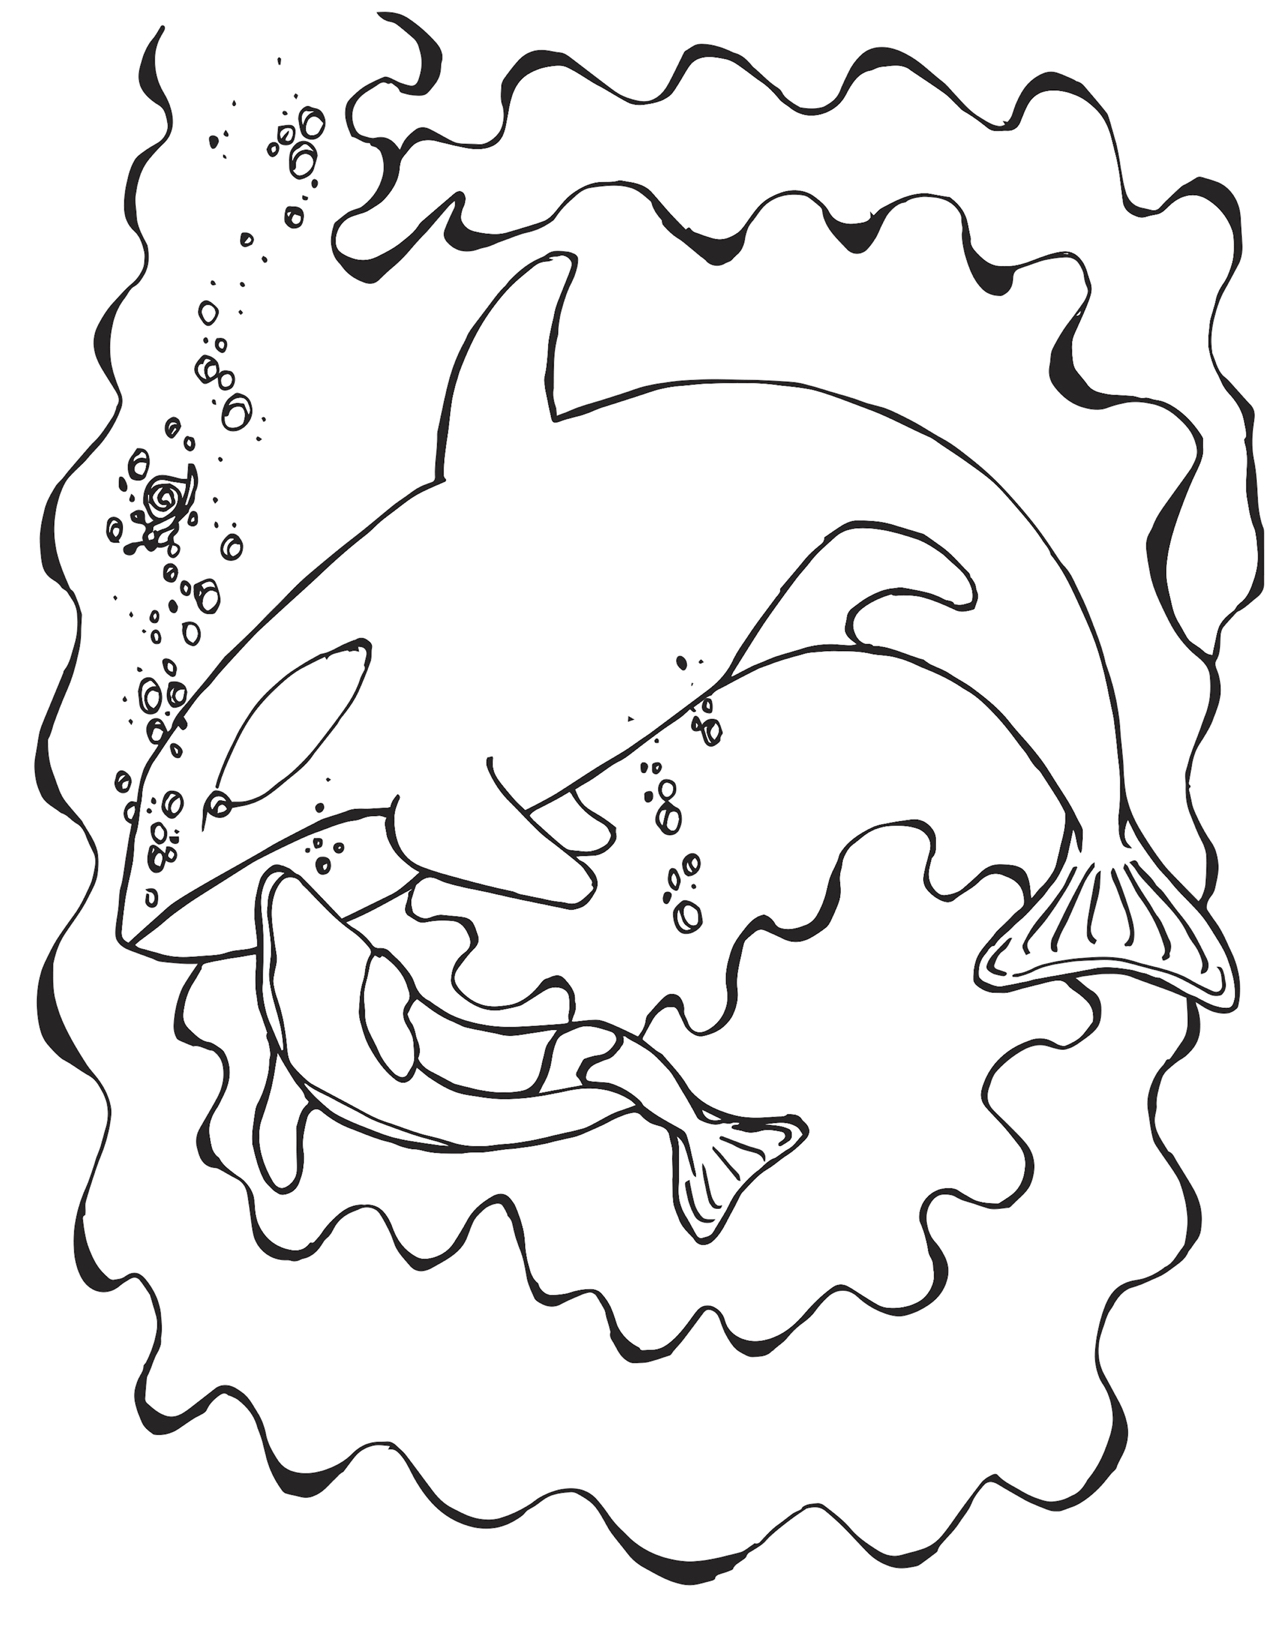 Momma and Baby Orca Whale Cuddling Coloring Page